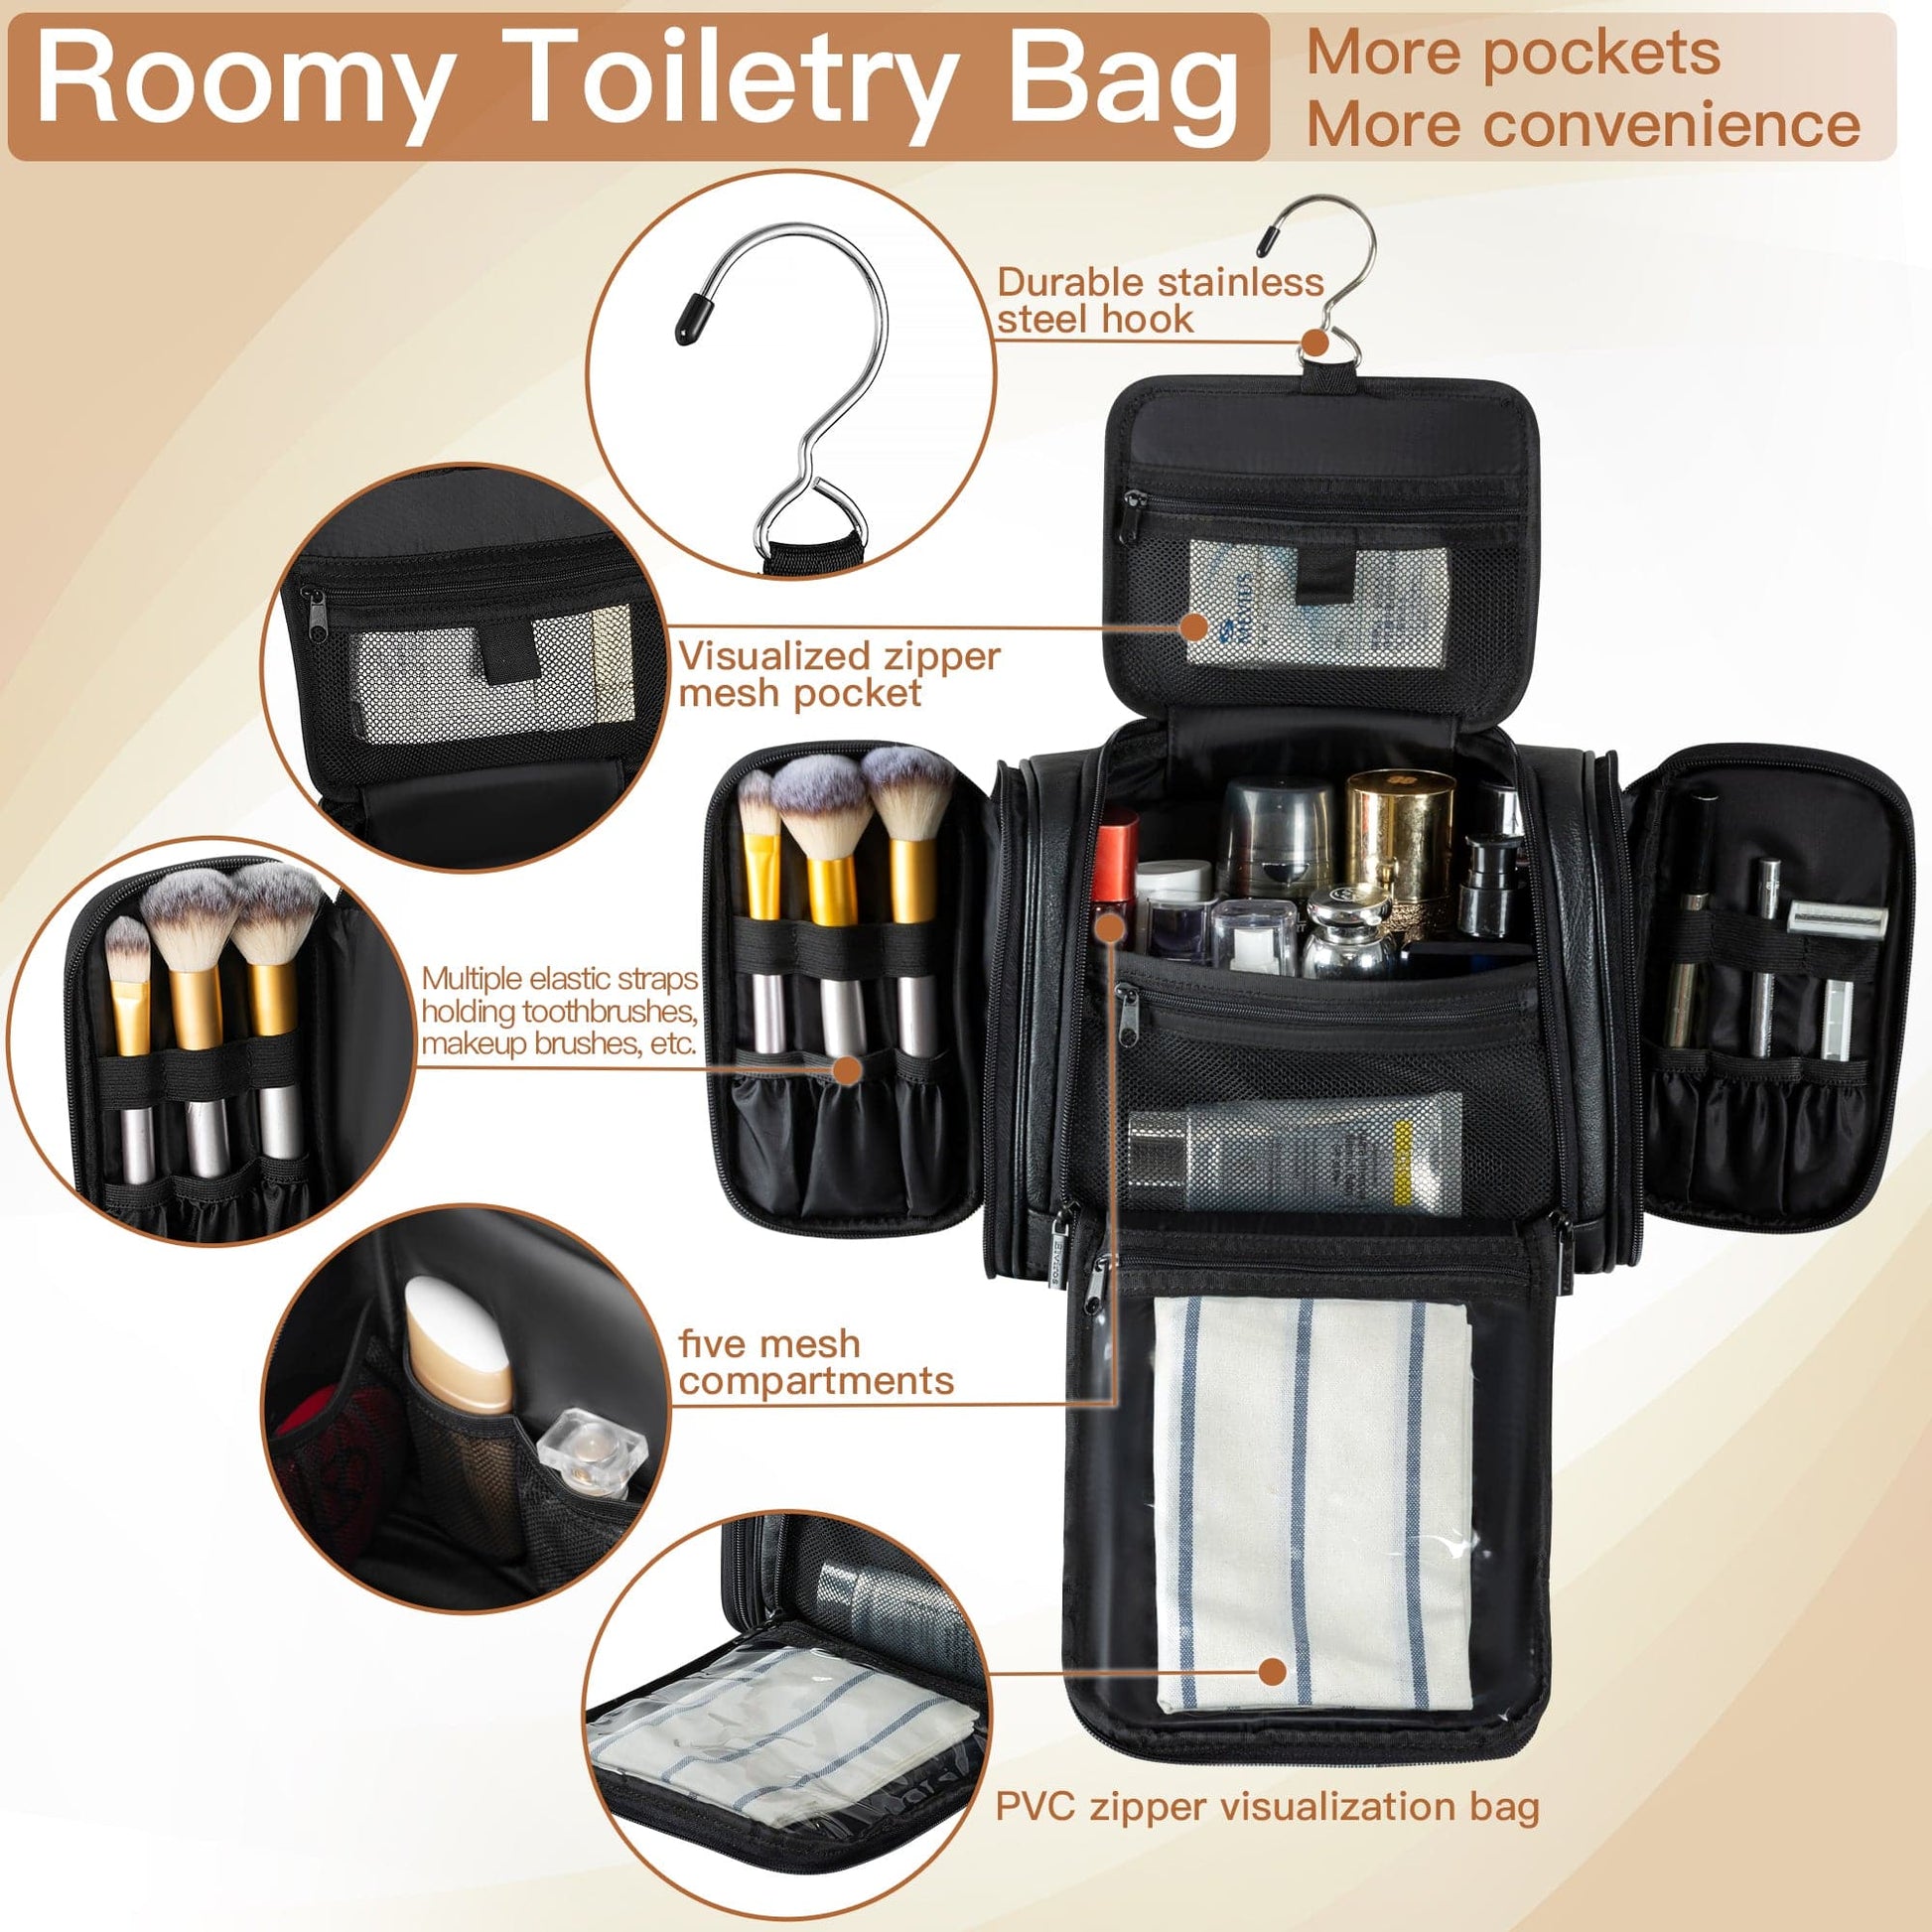 Shop for the Perfect Travel Organizer or Toiletry Bag